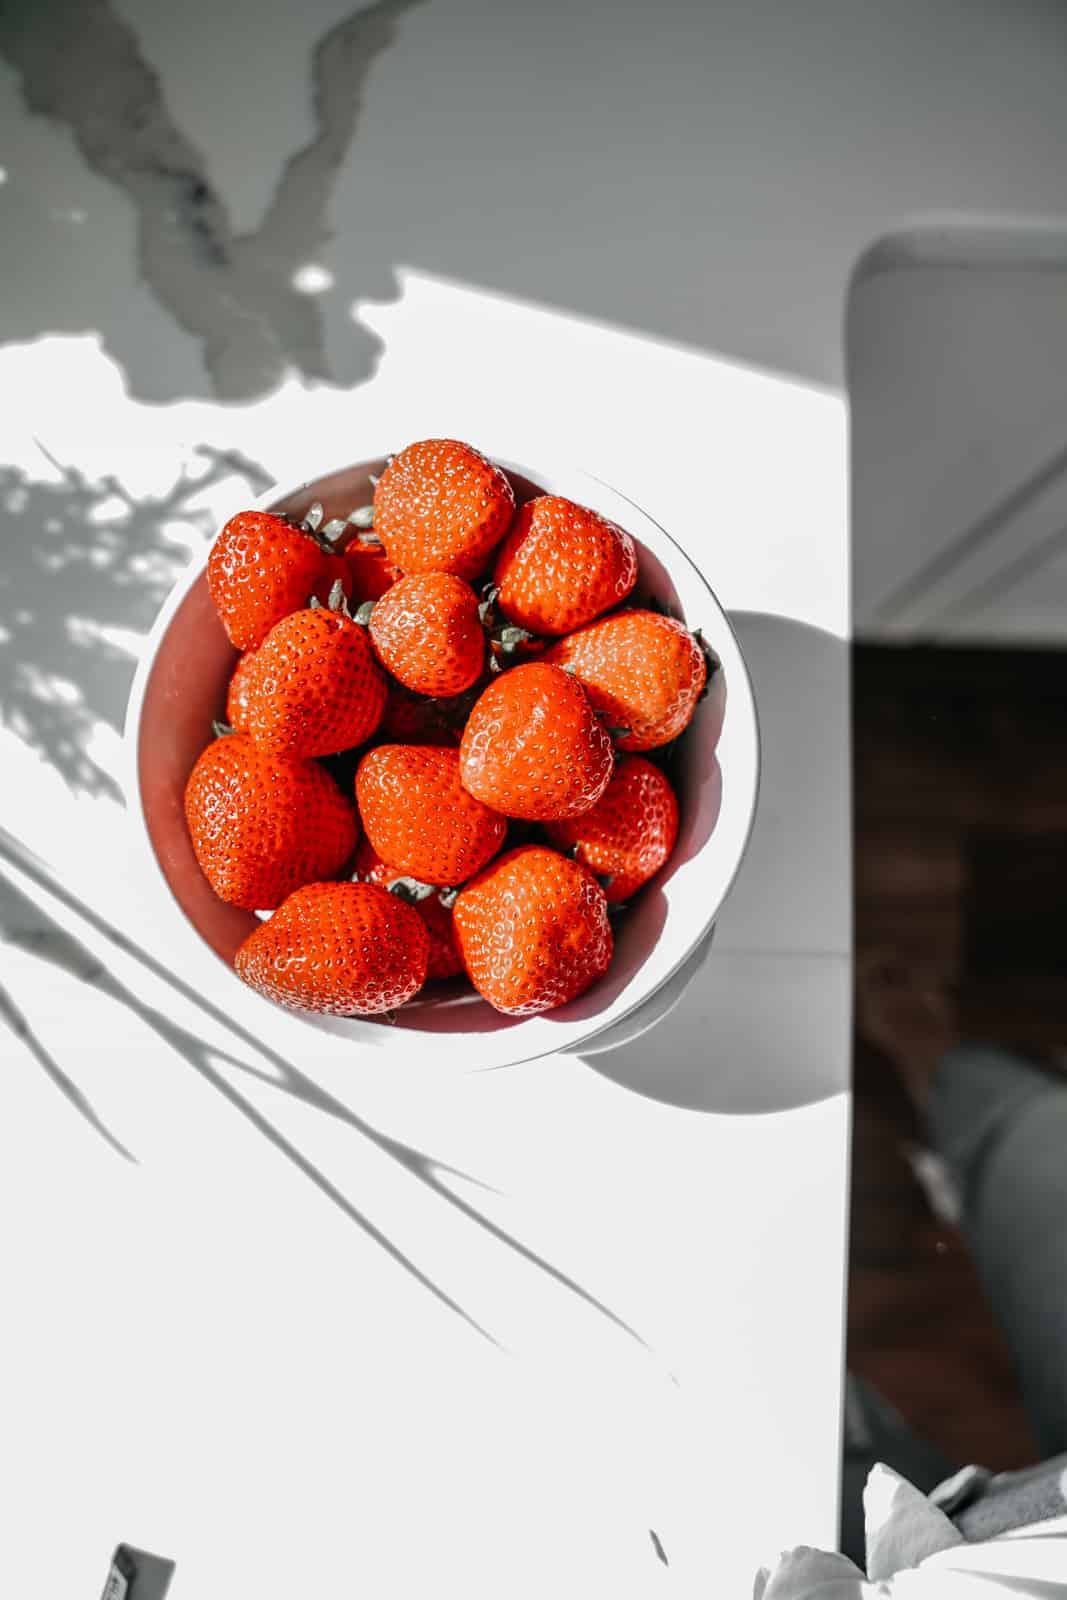 Big bowl of fresh strawberries on counter to demonstrate Maria's top food photography tips.